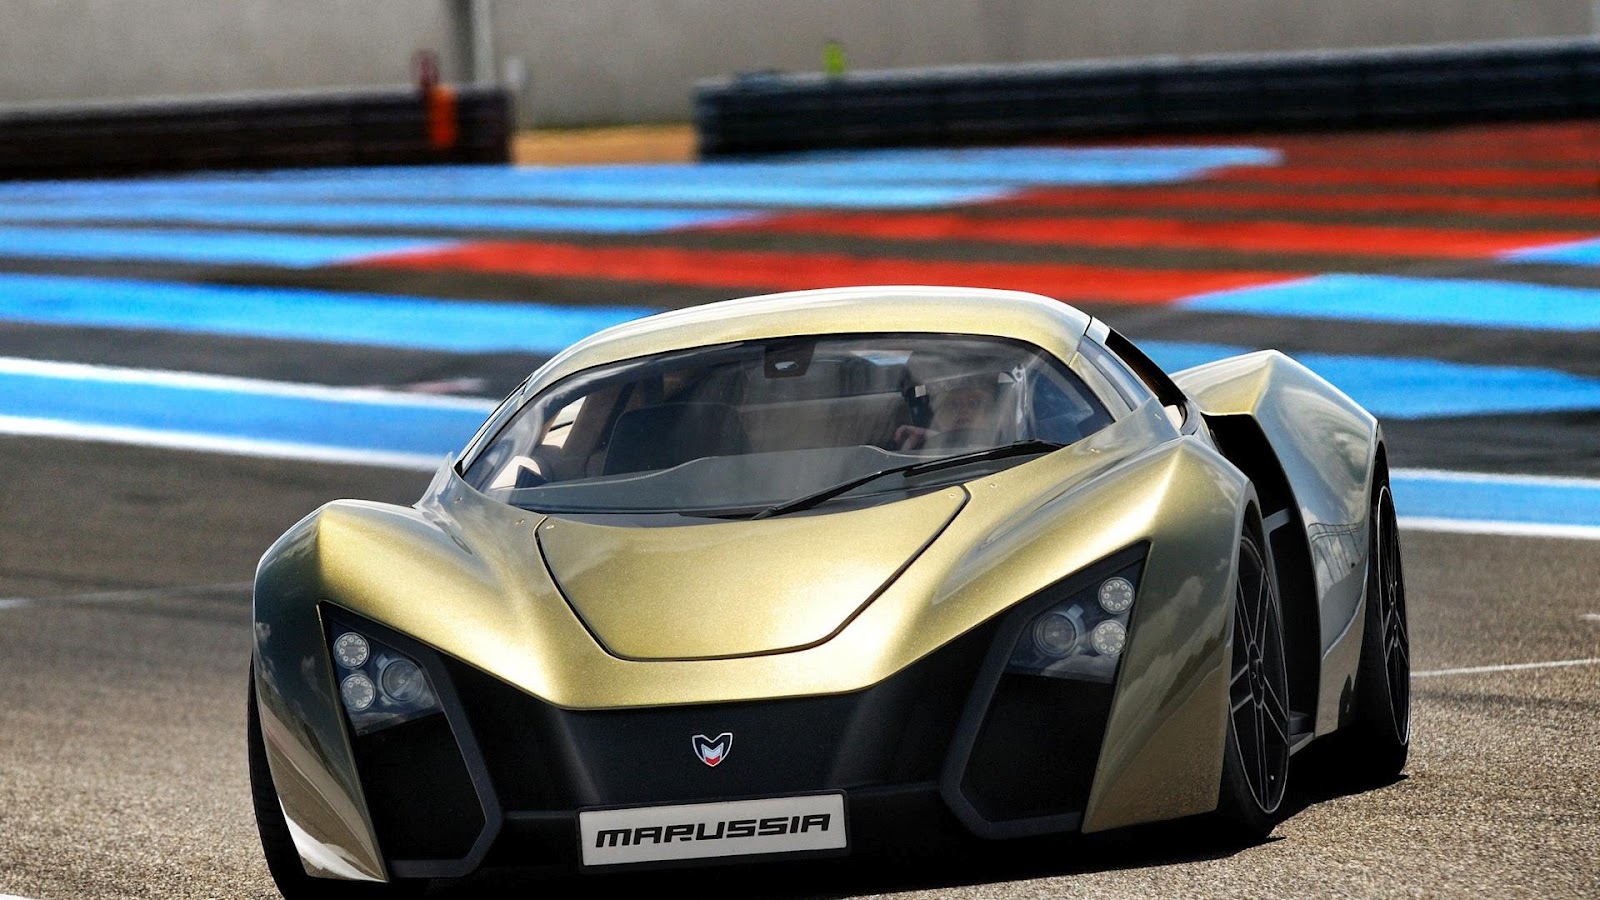 Marussia Cars Full HD Wallpaper 1080p Store For